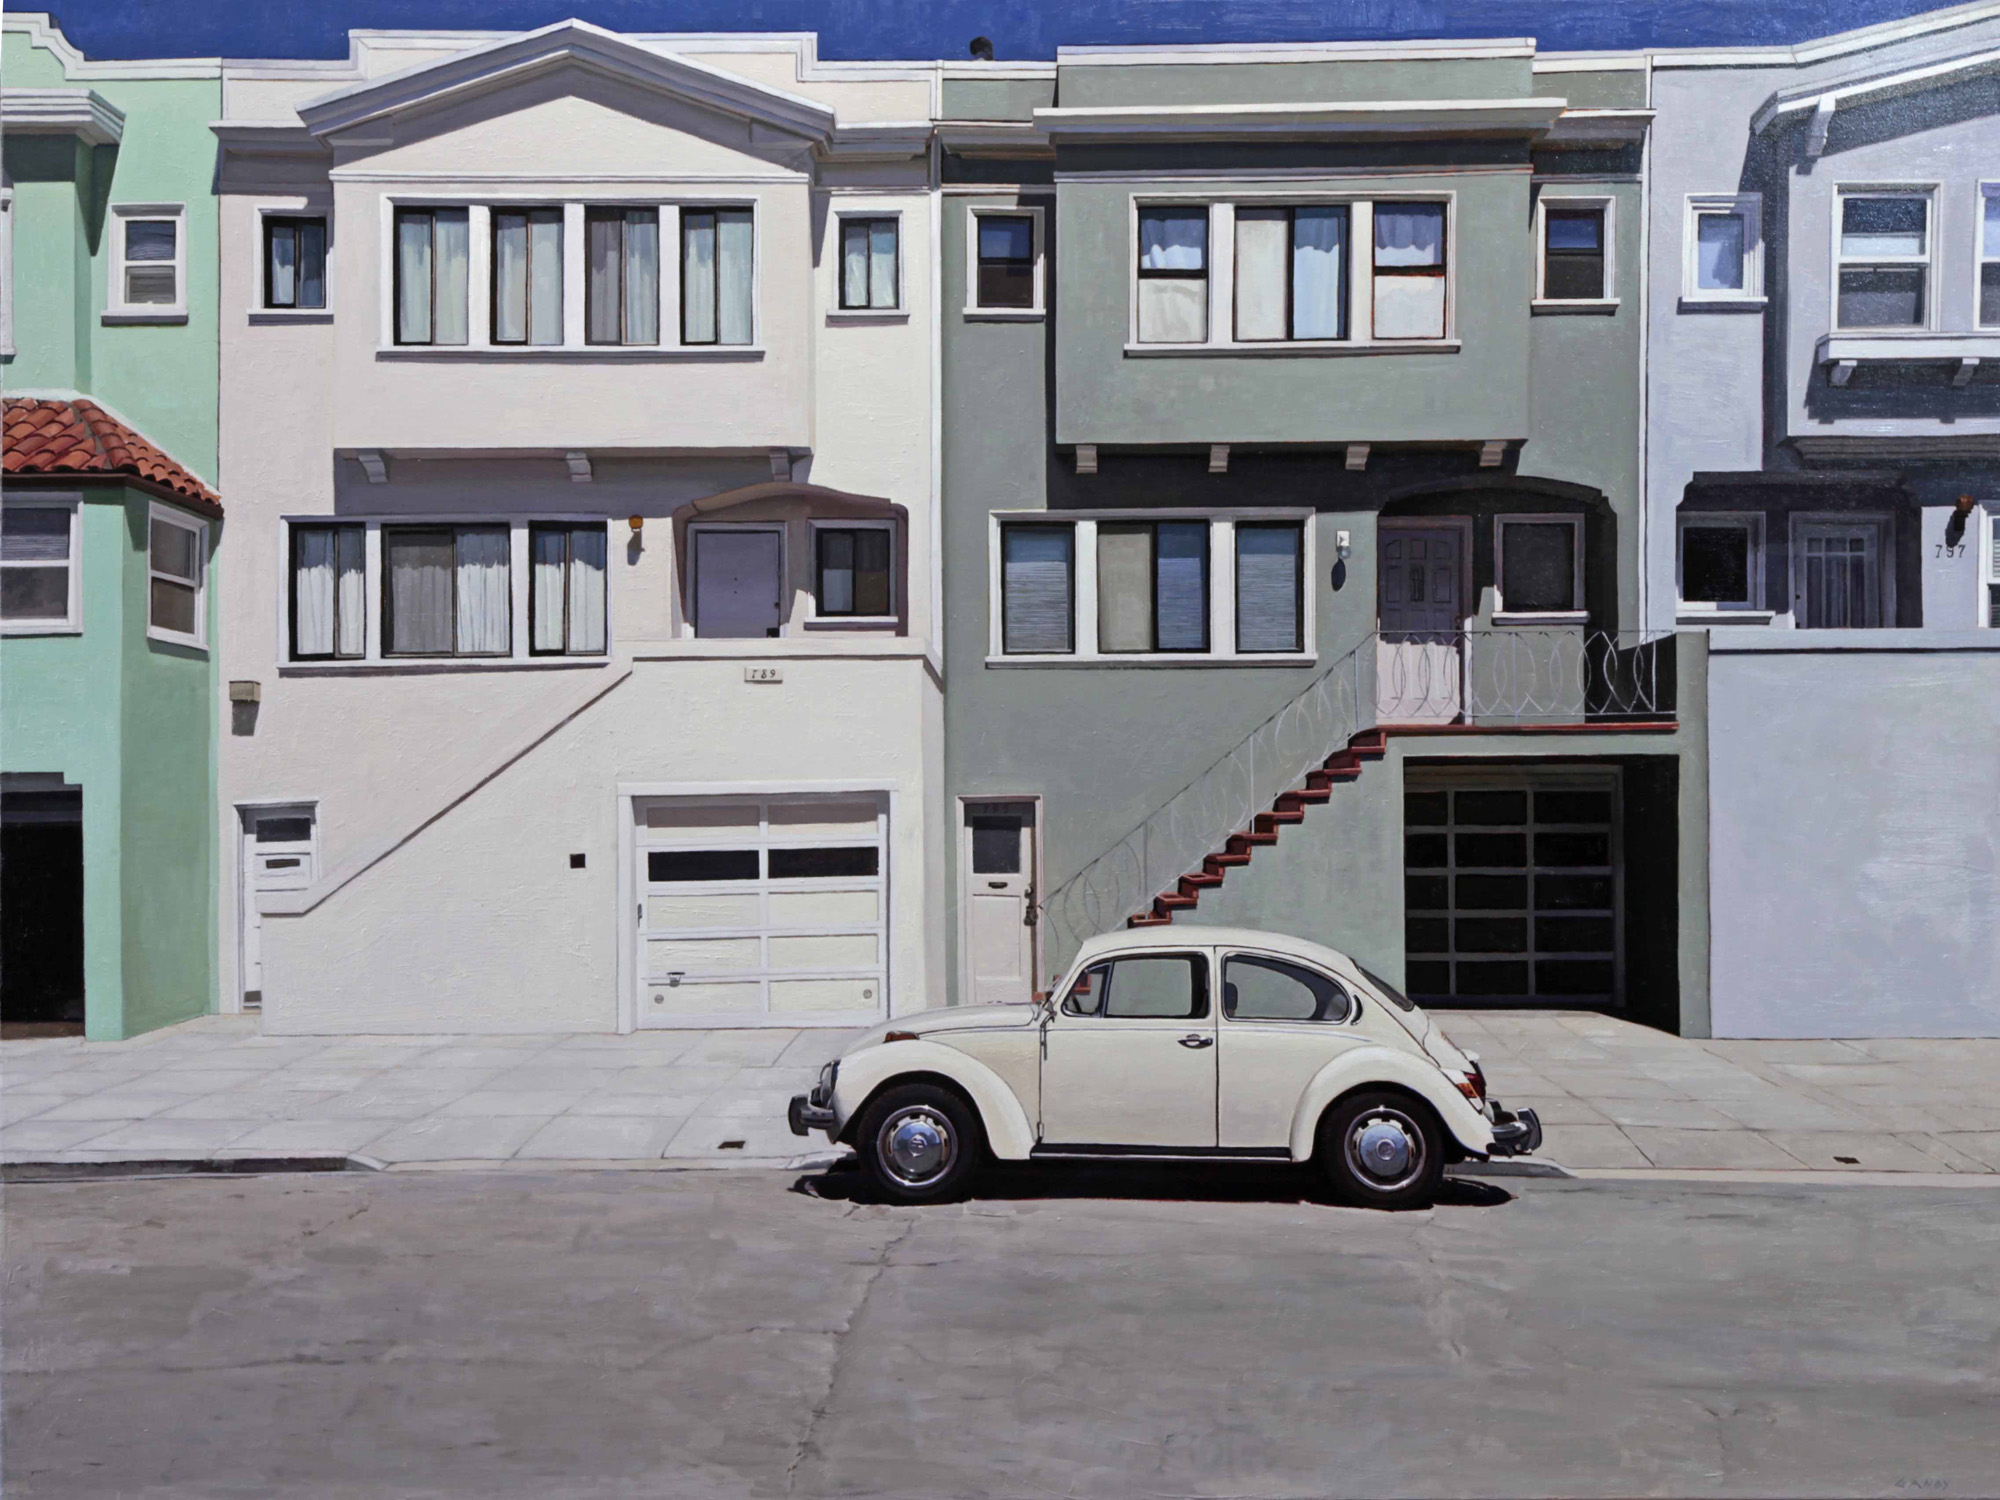 VW Bug in the Mission